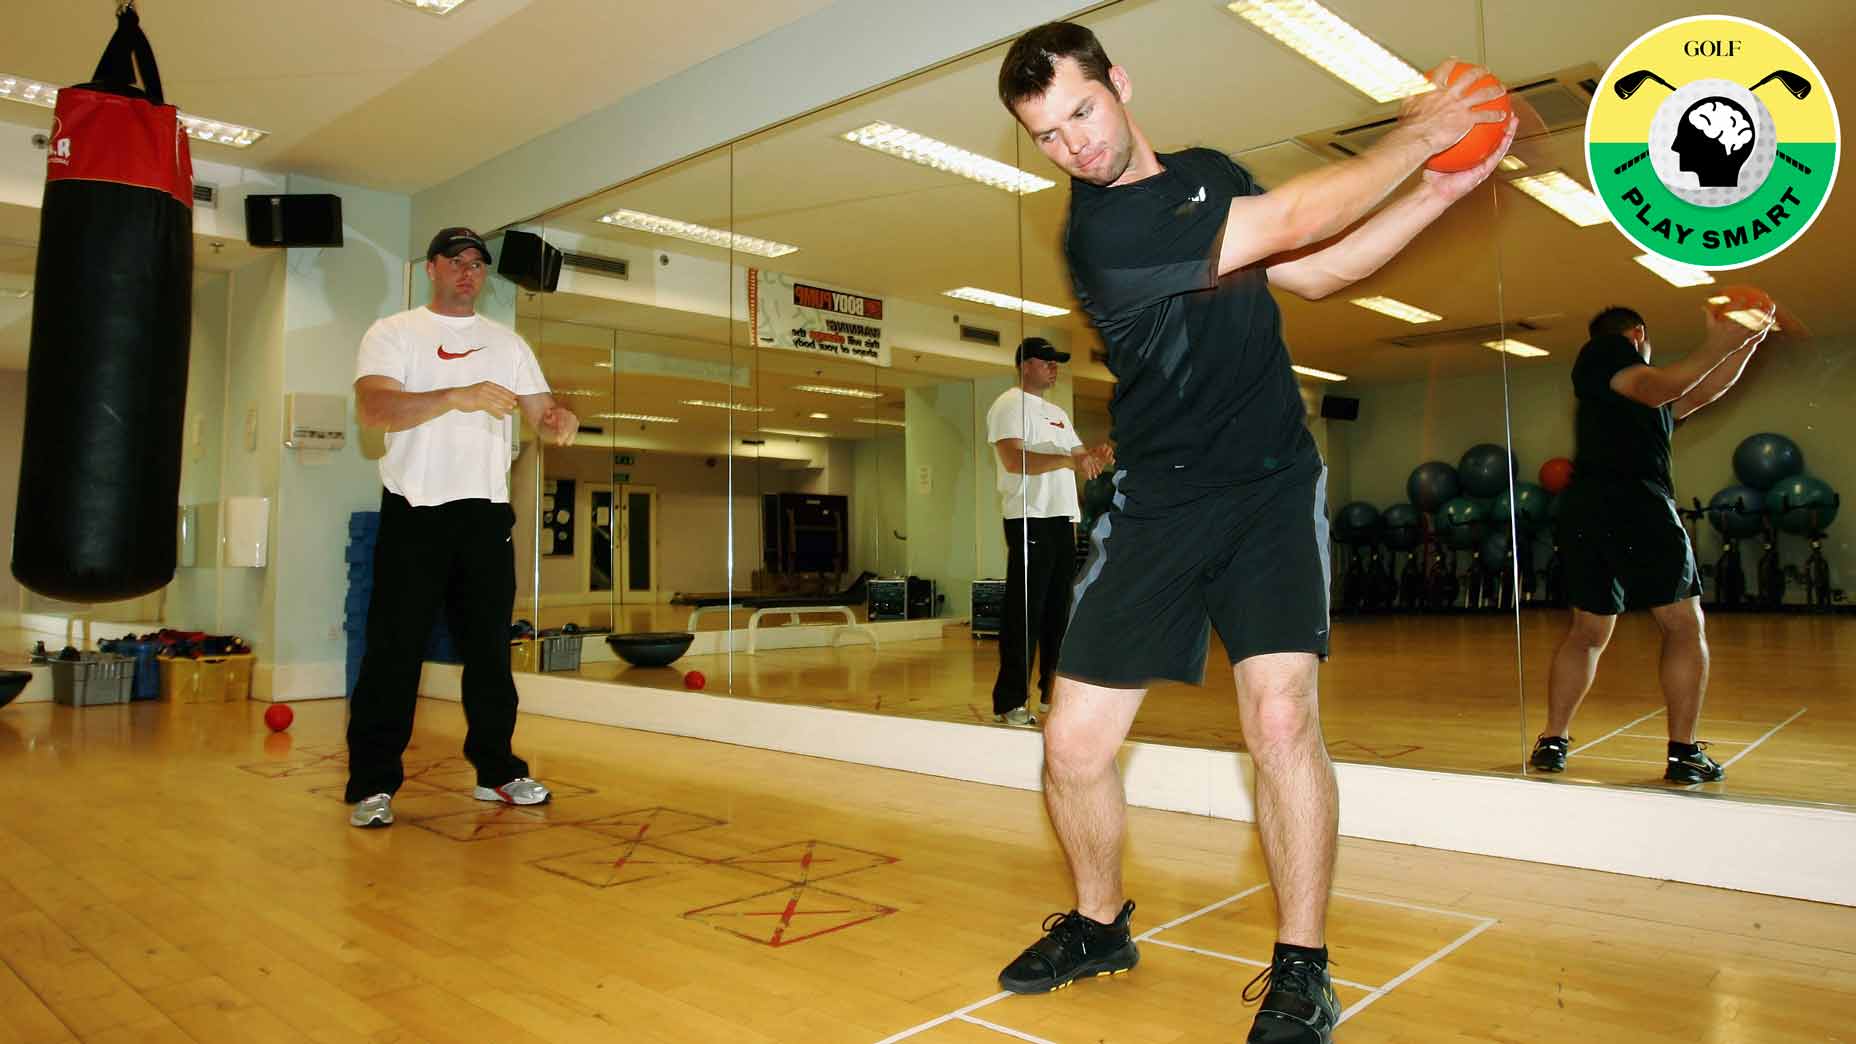 paul casey trains with a medicine ball in a training studio in 2005